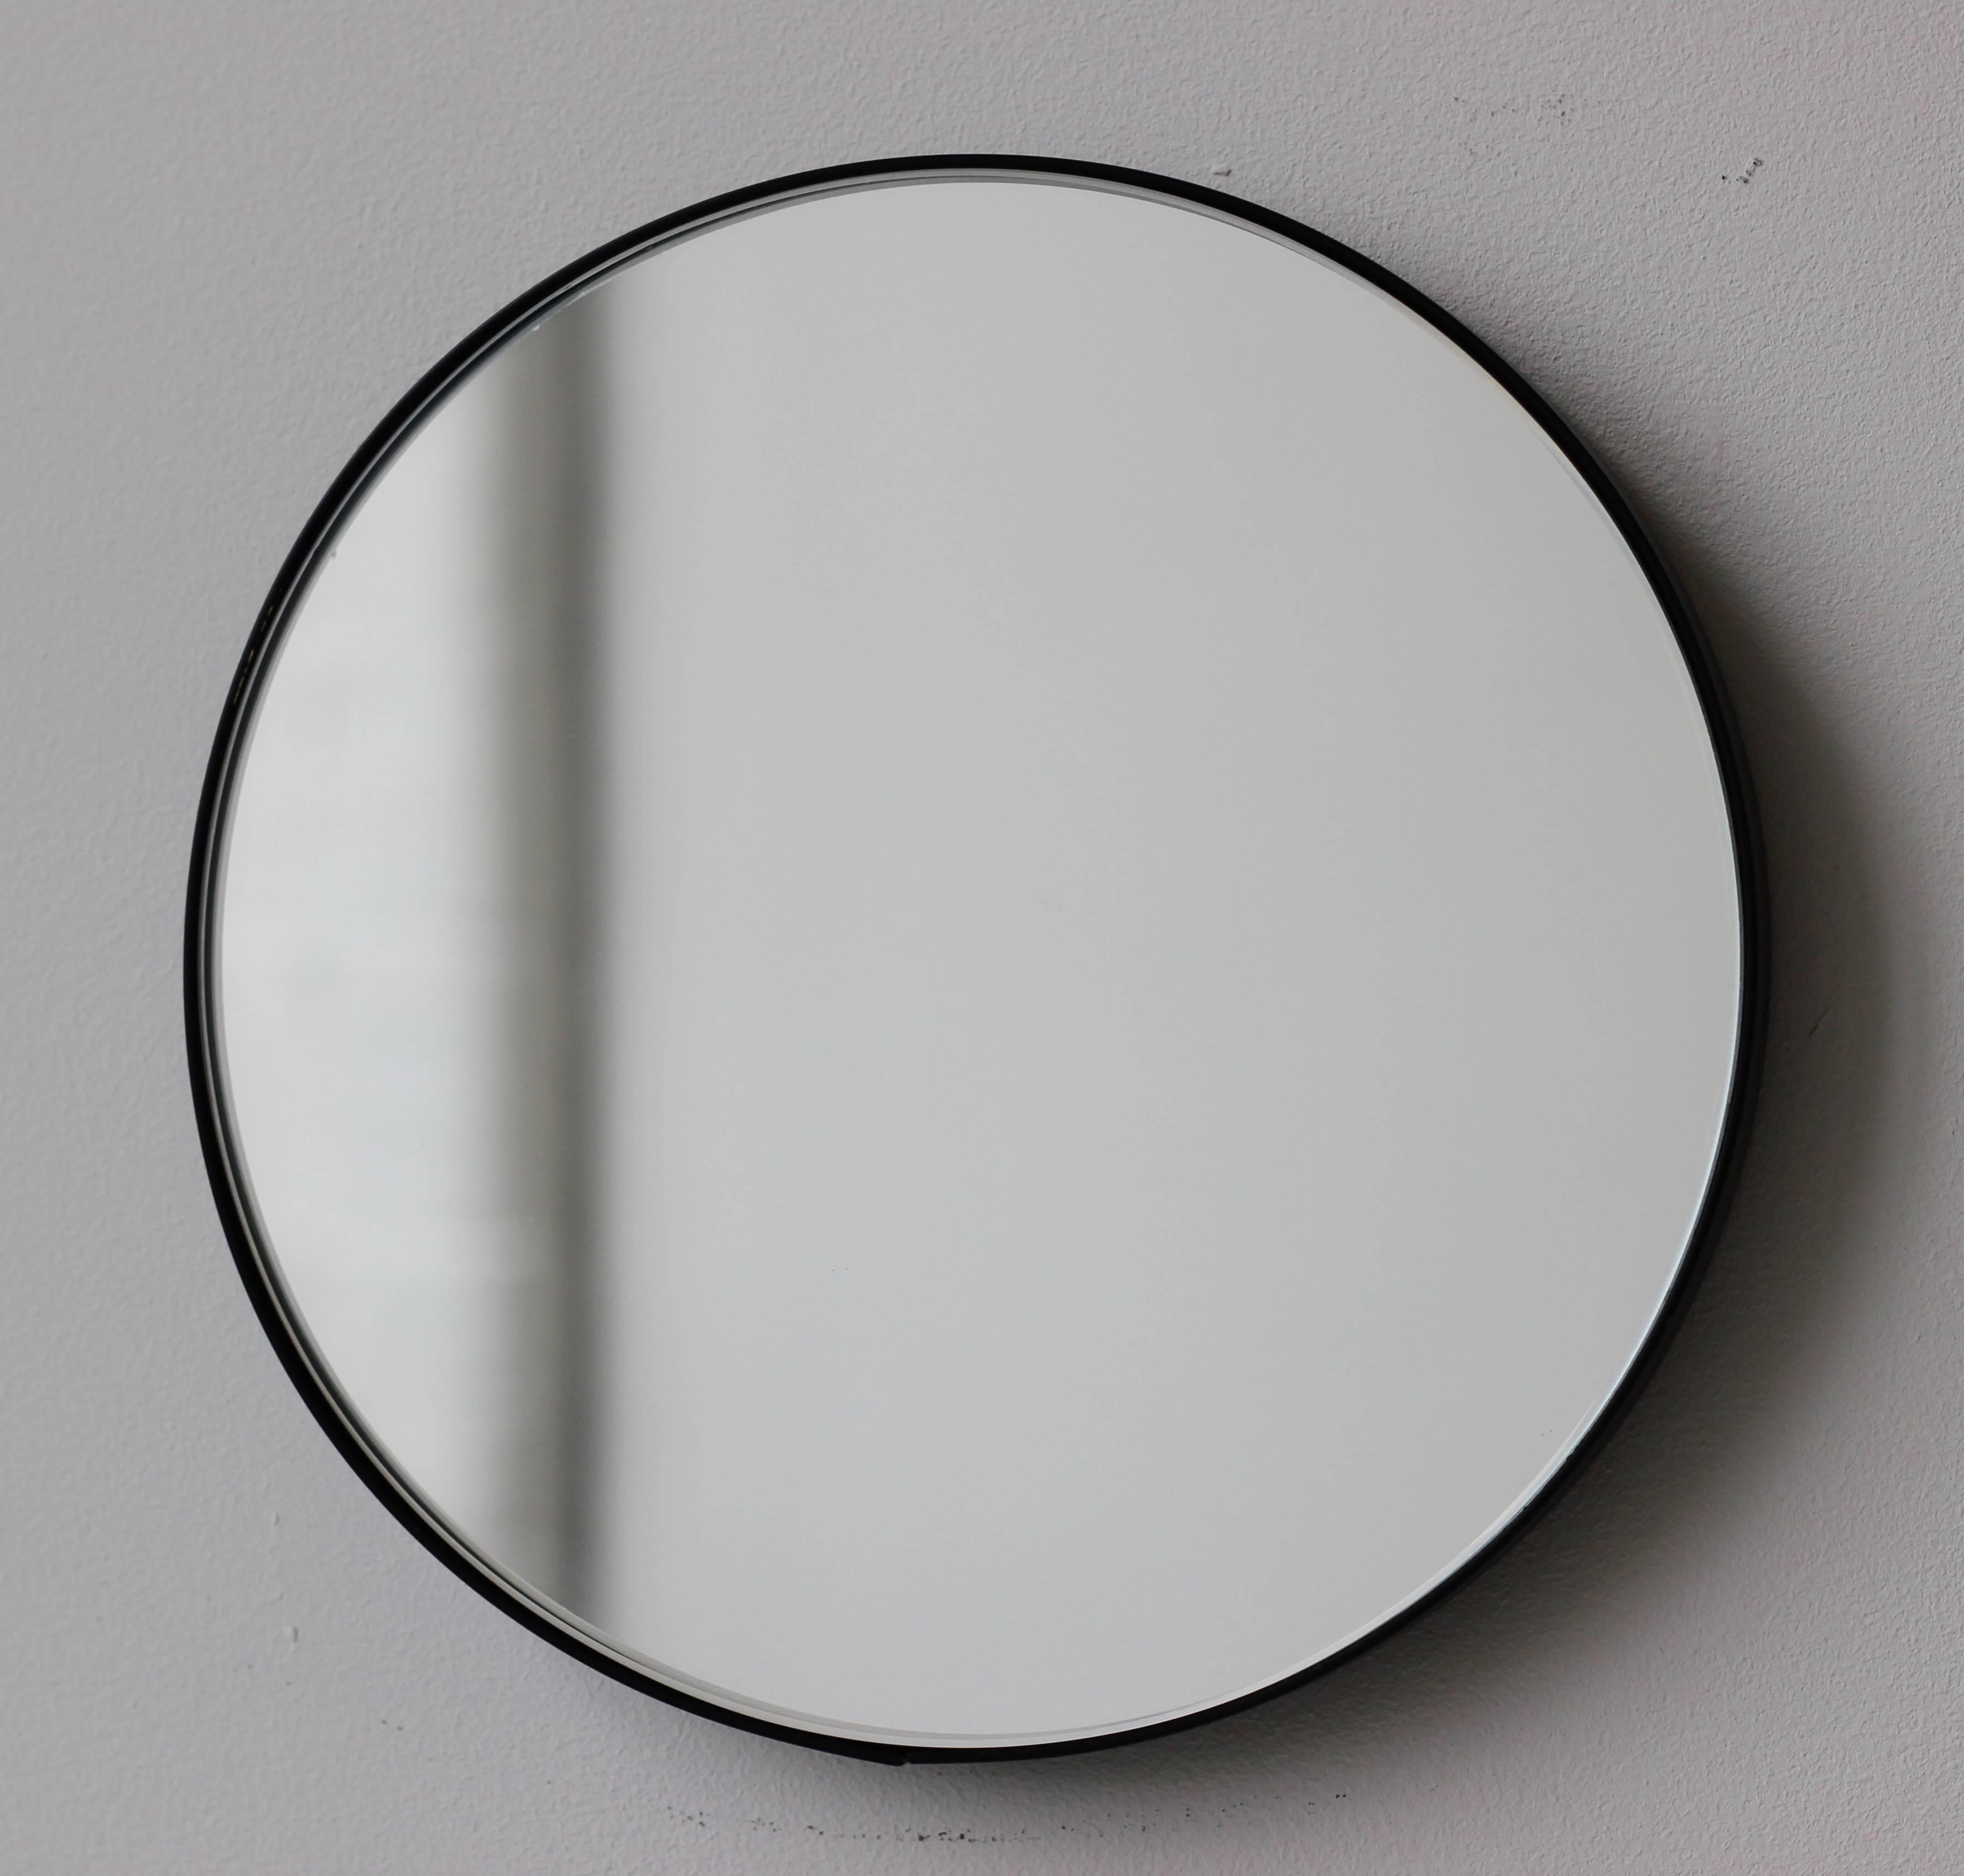 Minimalist Orbis™ round mirror with an elegant aluminium powder coated black frame. Designed and handcrafted in London, UK.

Medium, large and extra-large mirrors (60, 80 and 100cm) are fitted with an ingenious French cleat (split batten) system so